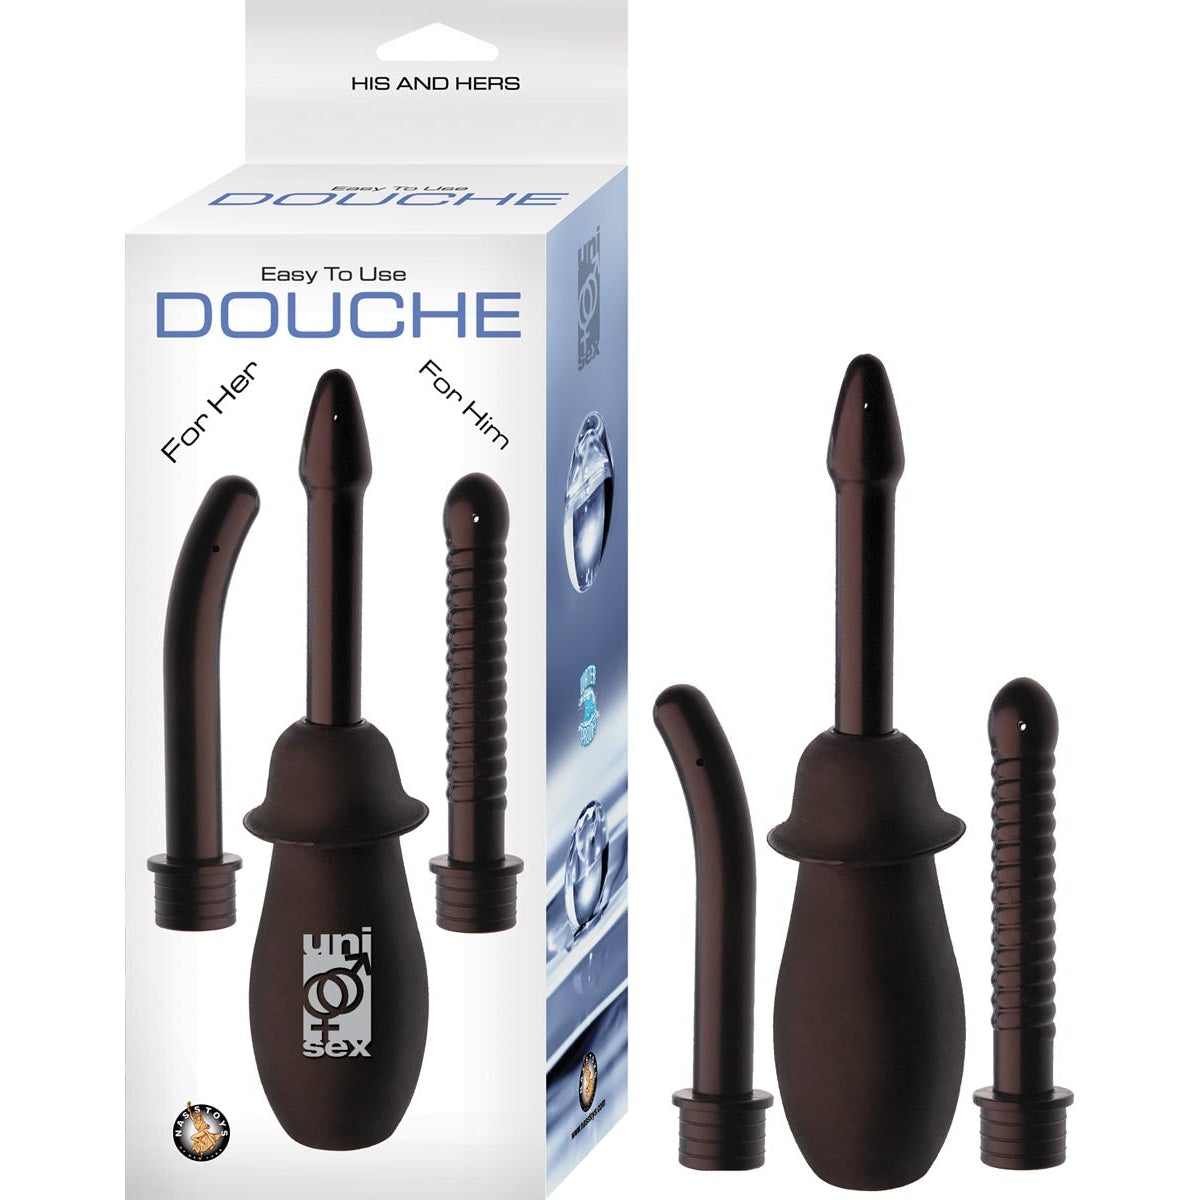 Easy To Use Anal Douche